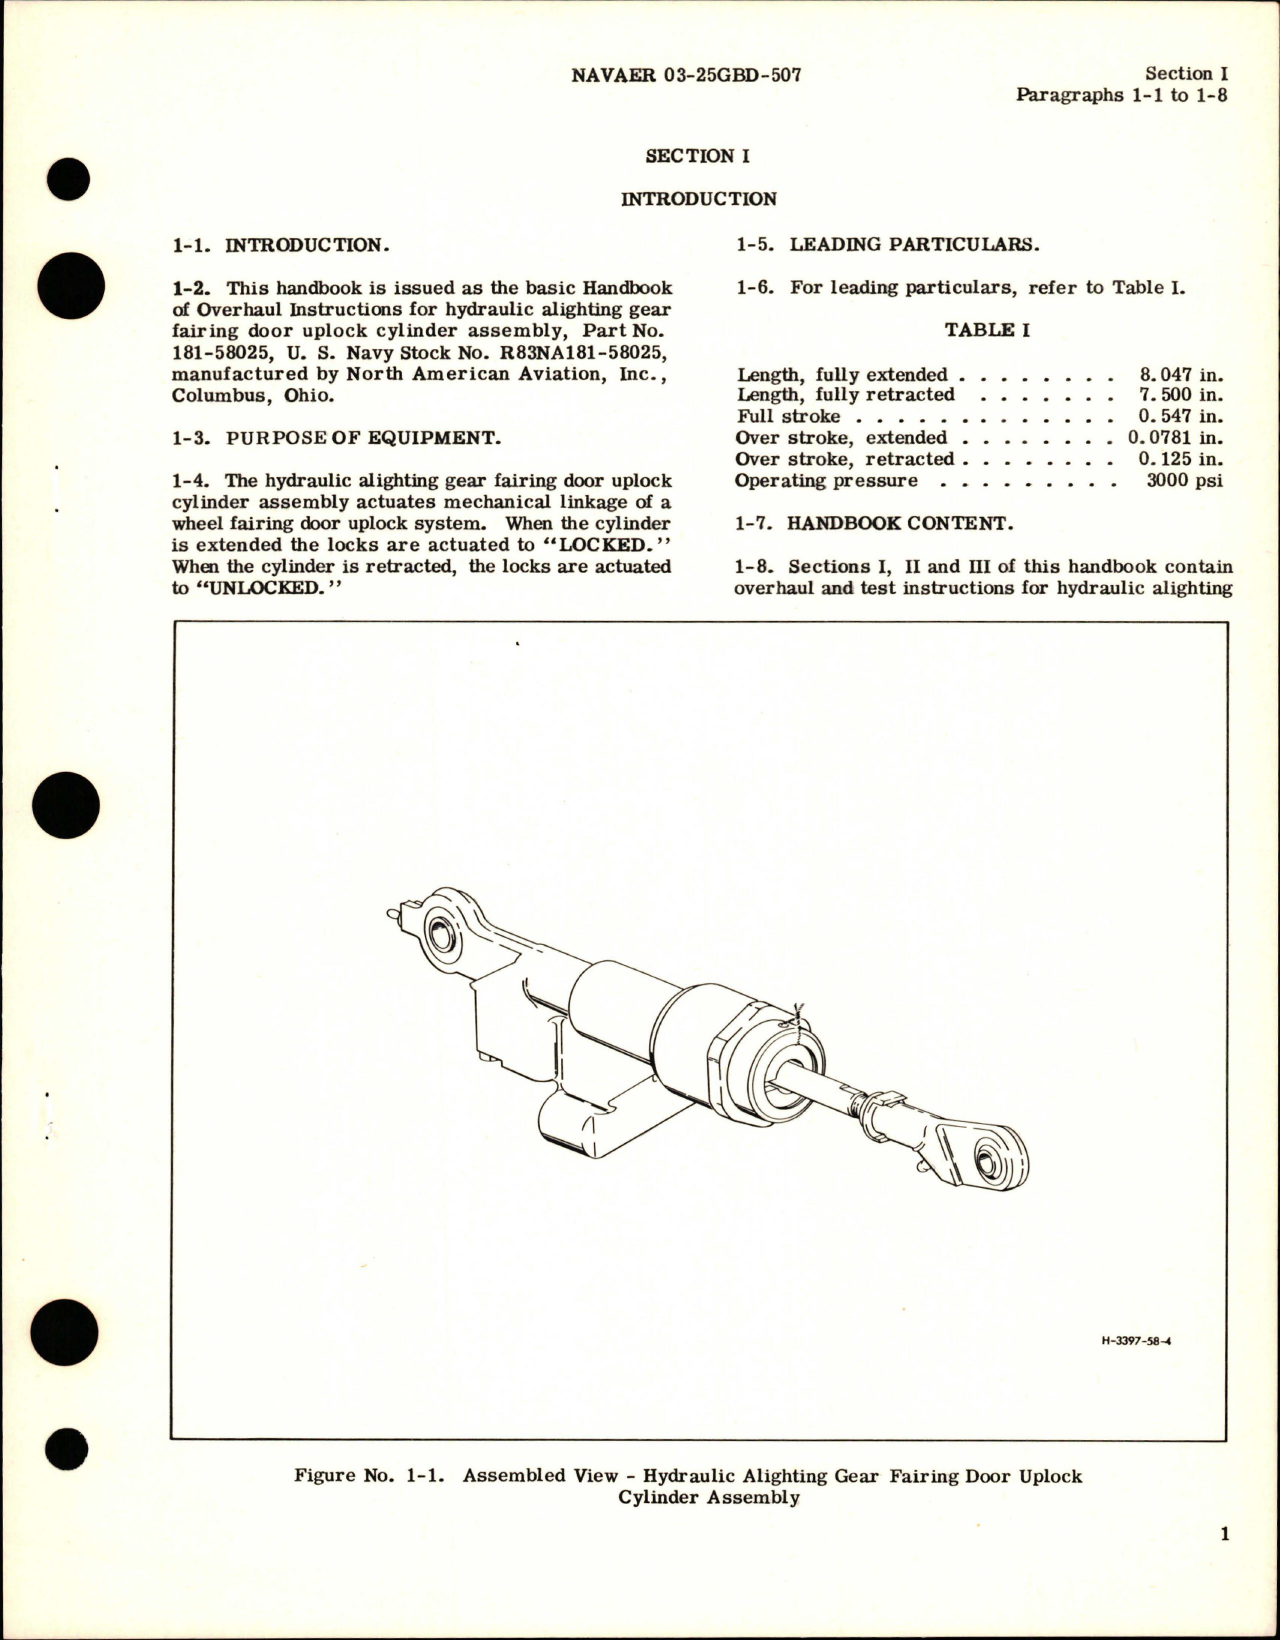 Sample page 5 from AirCorps Library document: Overhaul Instructions for Hydraulic Alighting Gear Fairing Door Uplock Cylinder Assy - Part 181-58025 